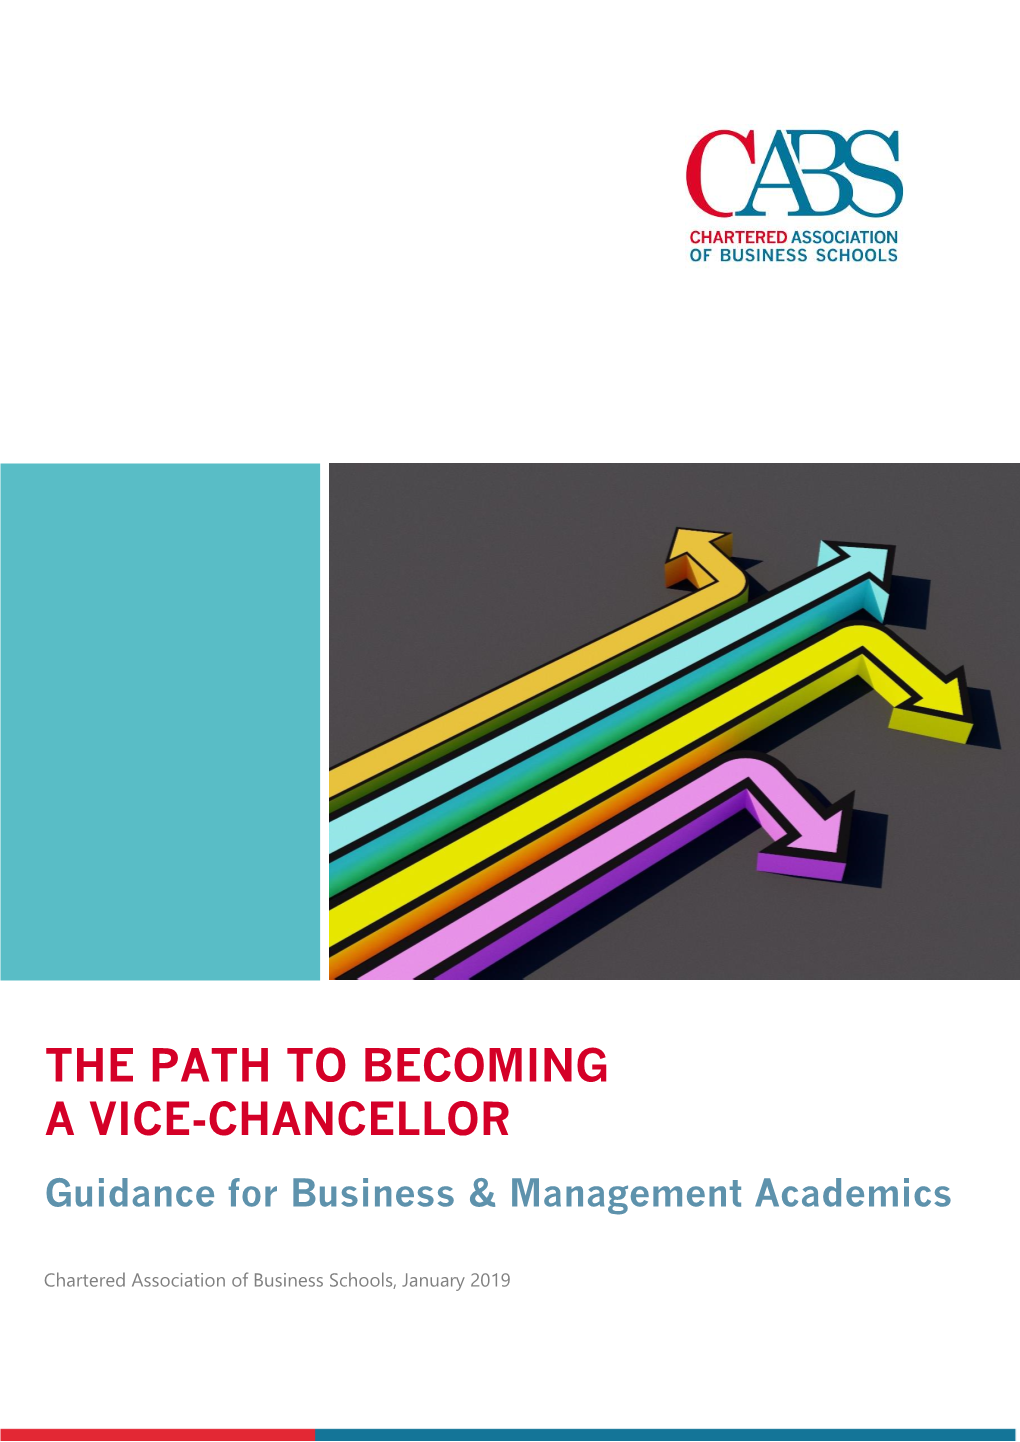 The Path to Becoming a Vice-Chancellor